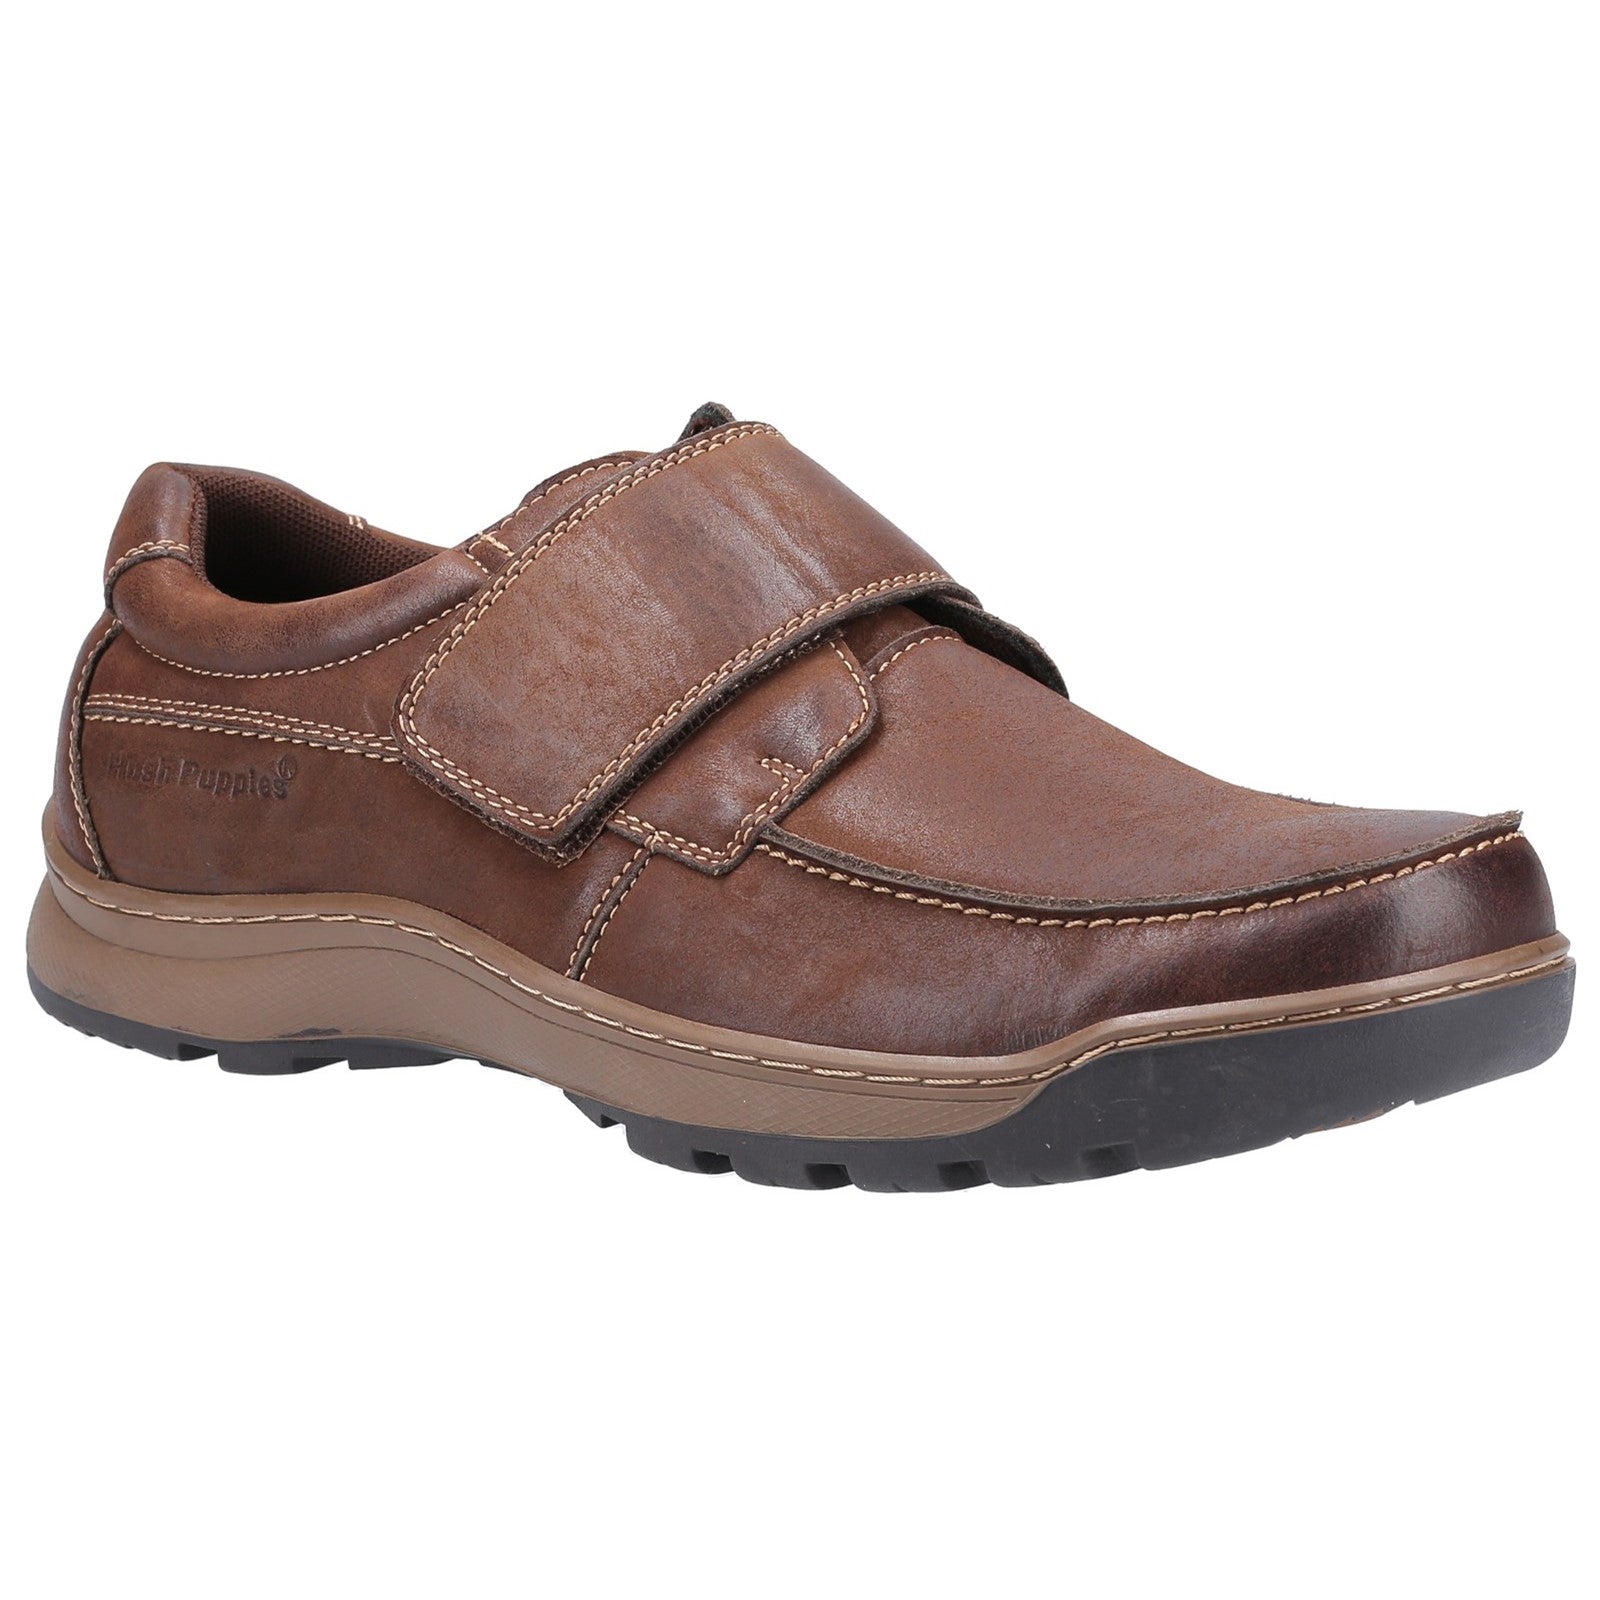 Mens Classic Touch Fastening Shoes Brown Hush Puppies Casper Touch Fastening Shoes